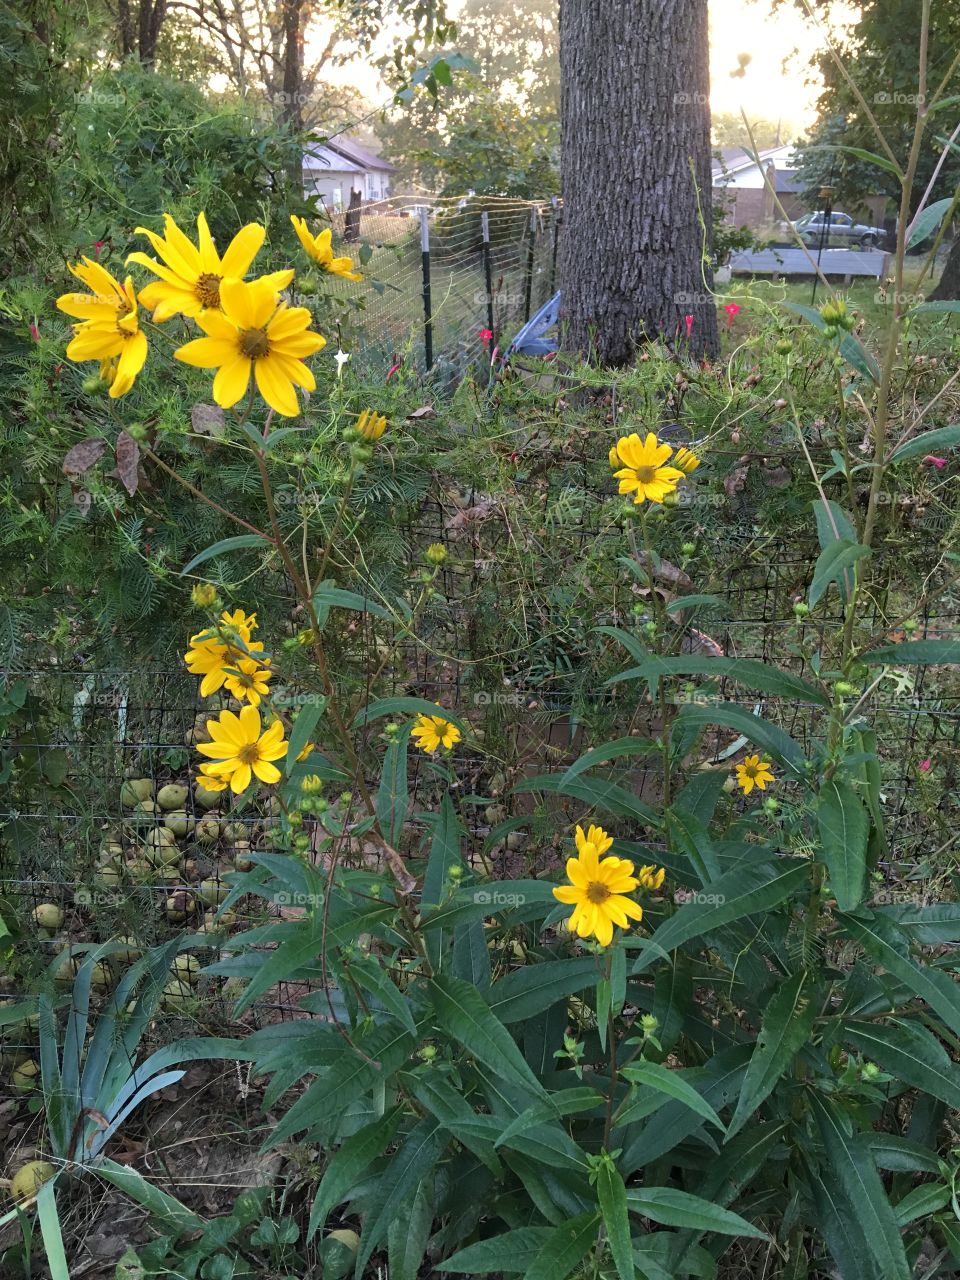 My end of the summer season fall flowers. Standing proud and beautiful with sunshine yellow.